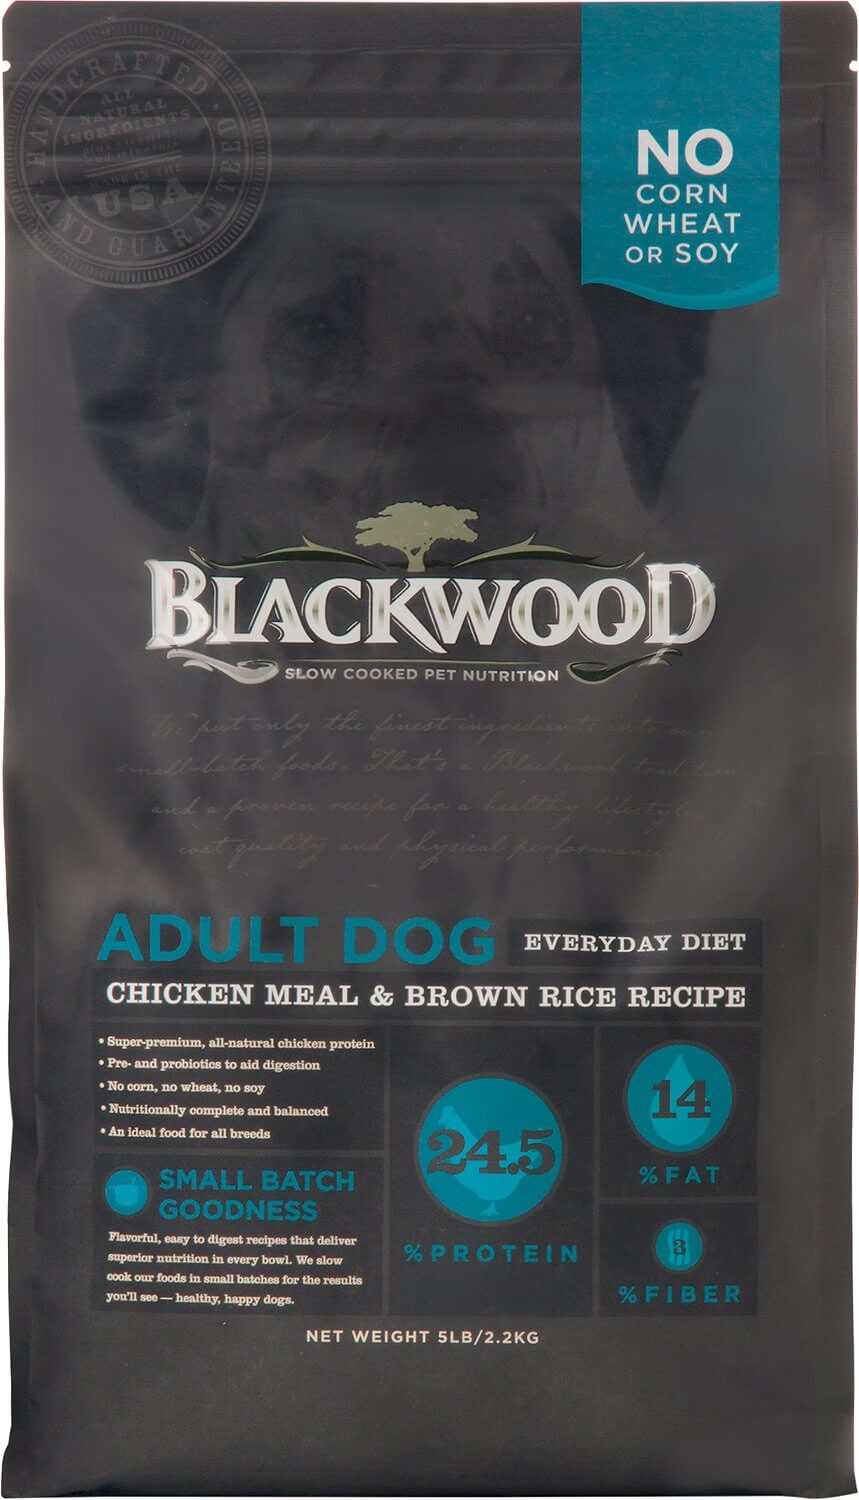 Blackwood Everyday Recipes Dog Food Review (Dry)